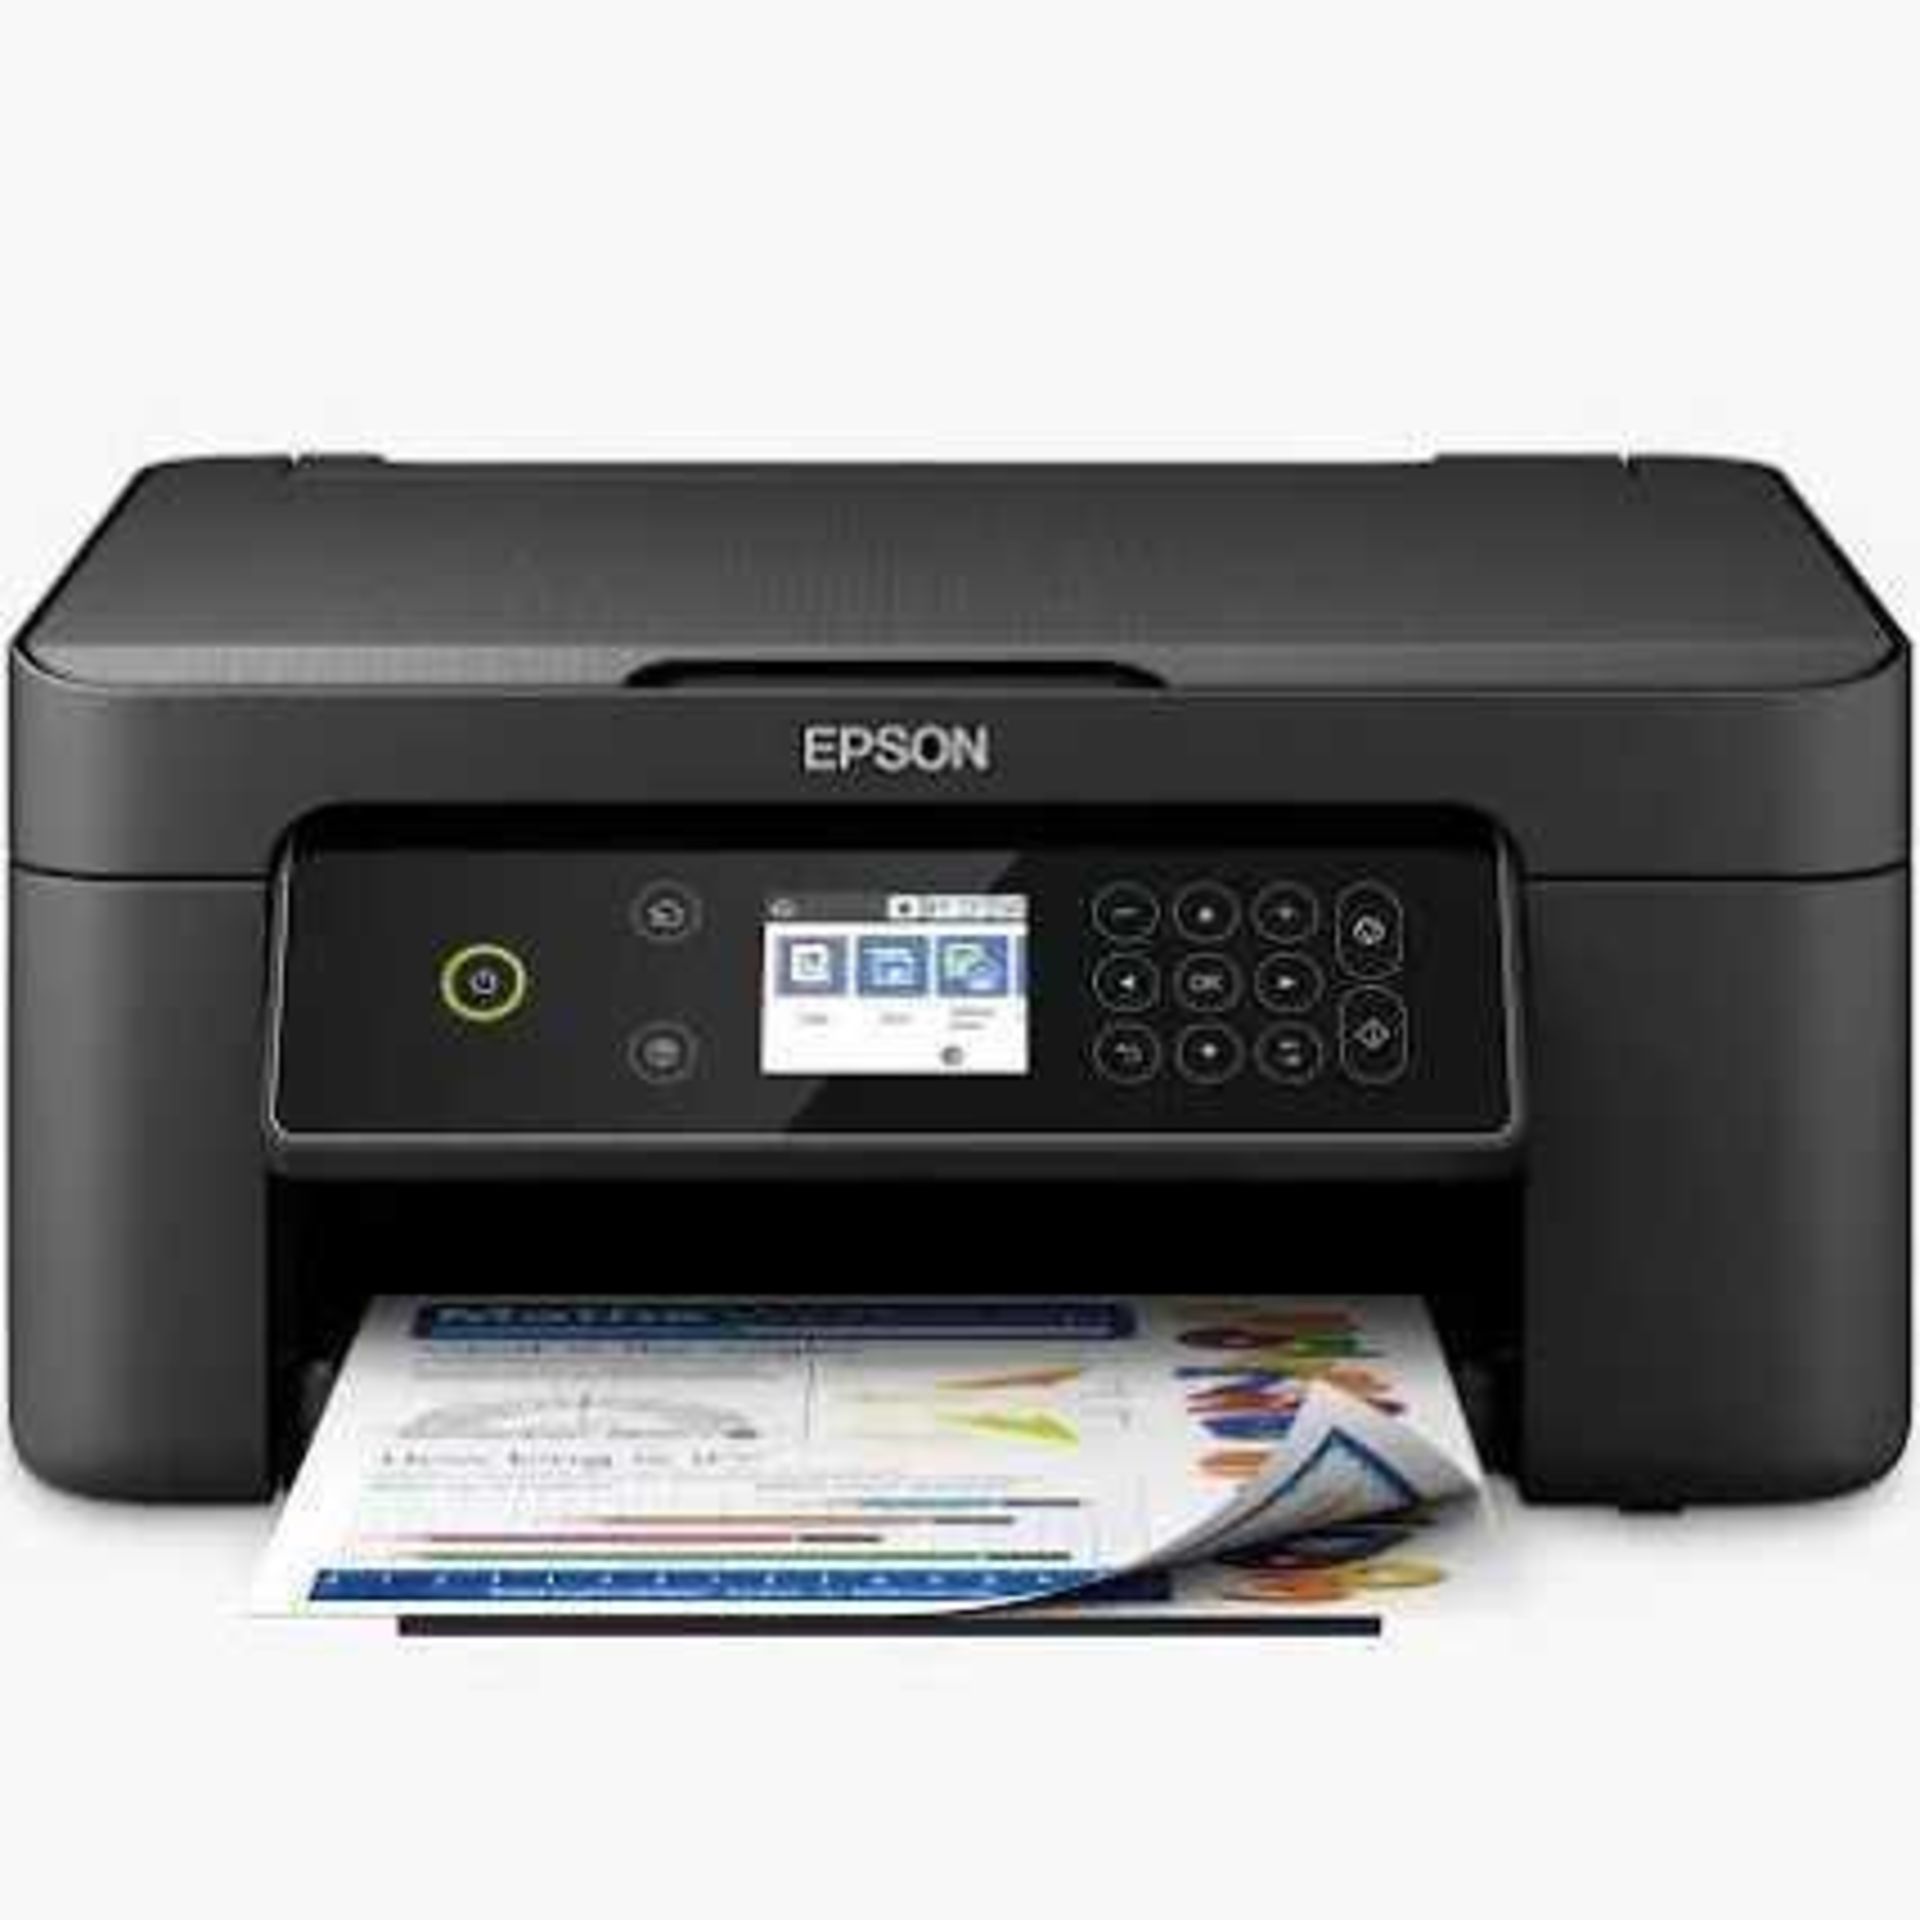 RRP £80 Boxed Epson Expression Home Xp-4150 Printer